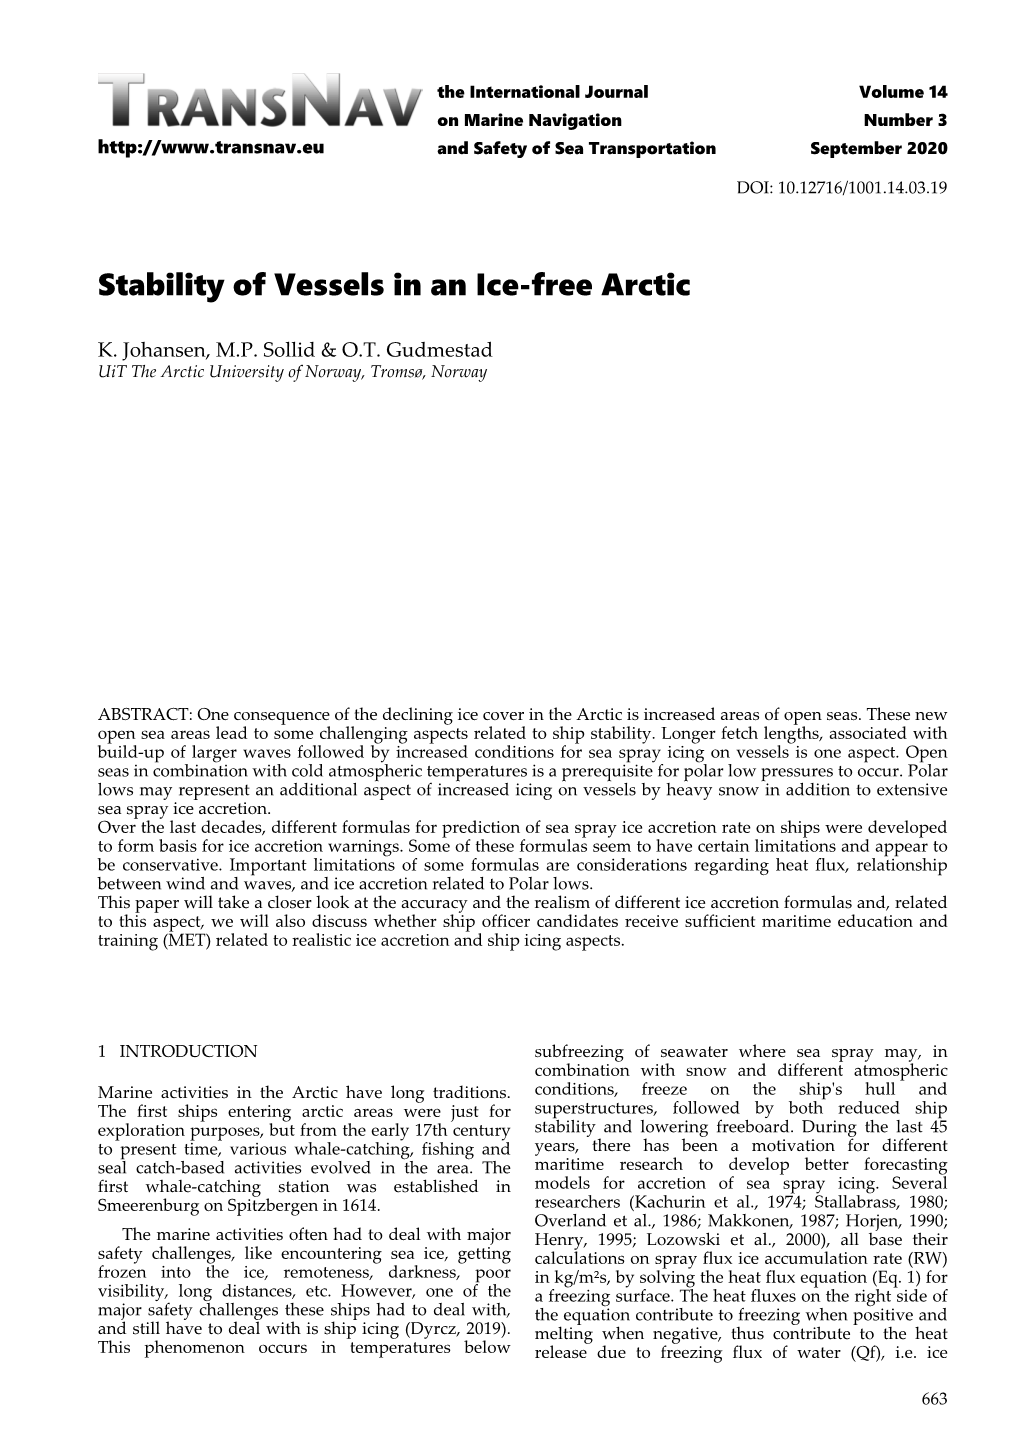 Stability of Vessels in an Ice-Free Arctic